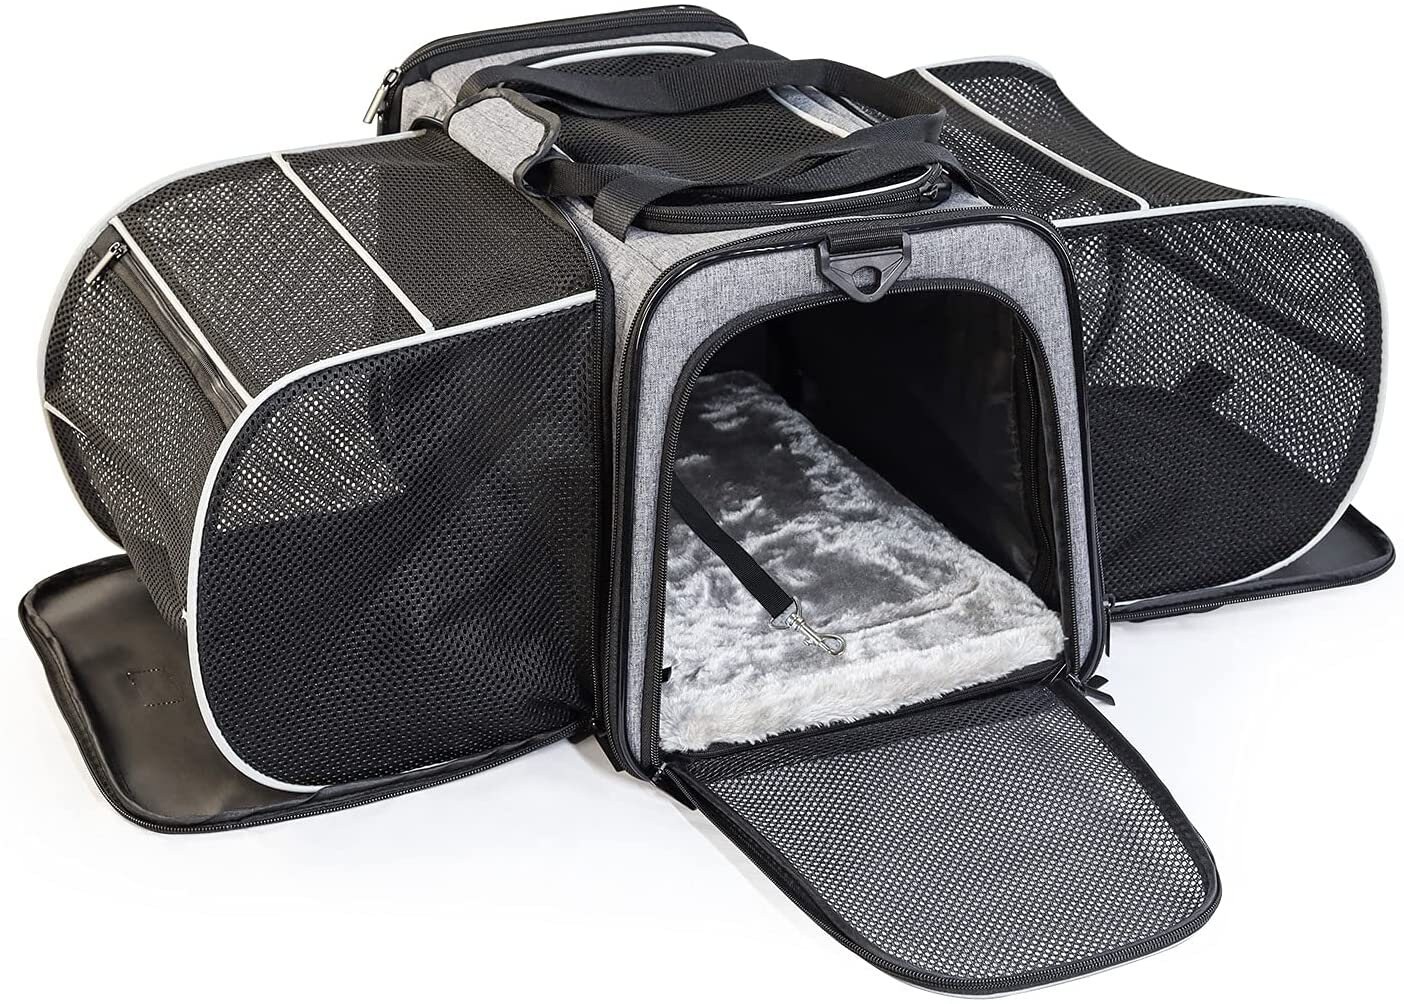  BELLAMORE GIFT Pet Carrier Airline Approved Travel